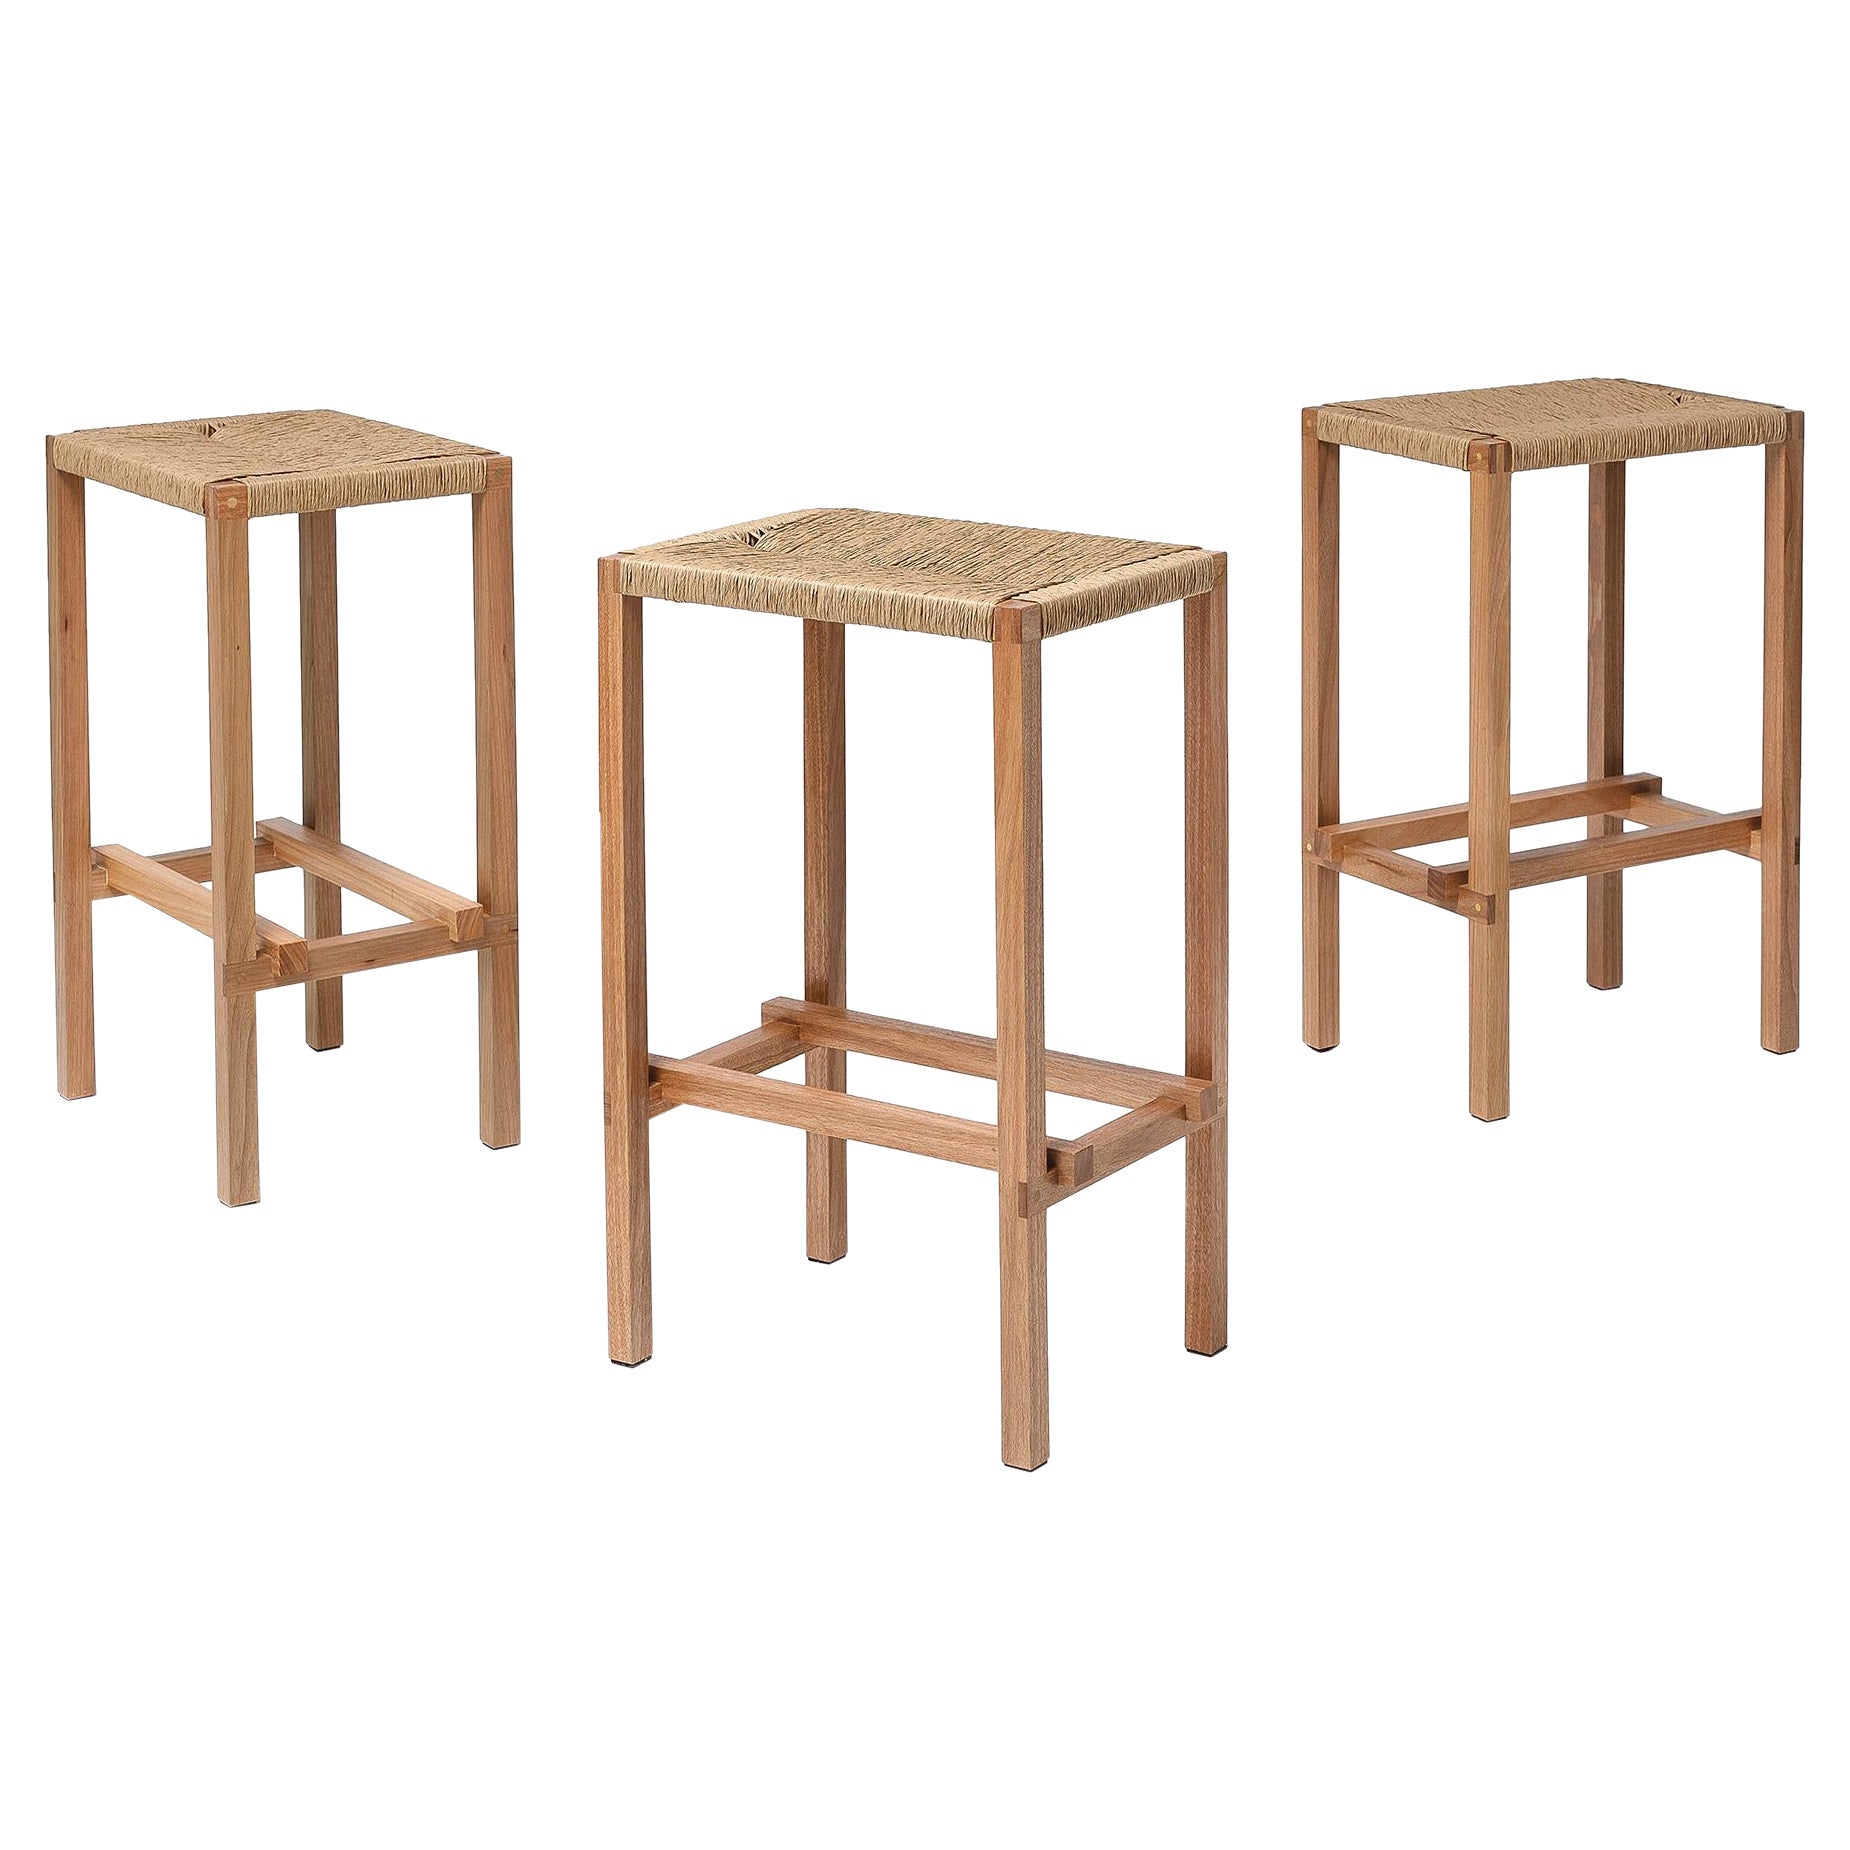 M2 Stool, Set of 3 Woven Seat Contemporary Handcrafted Solid Wood Furniture For Sale